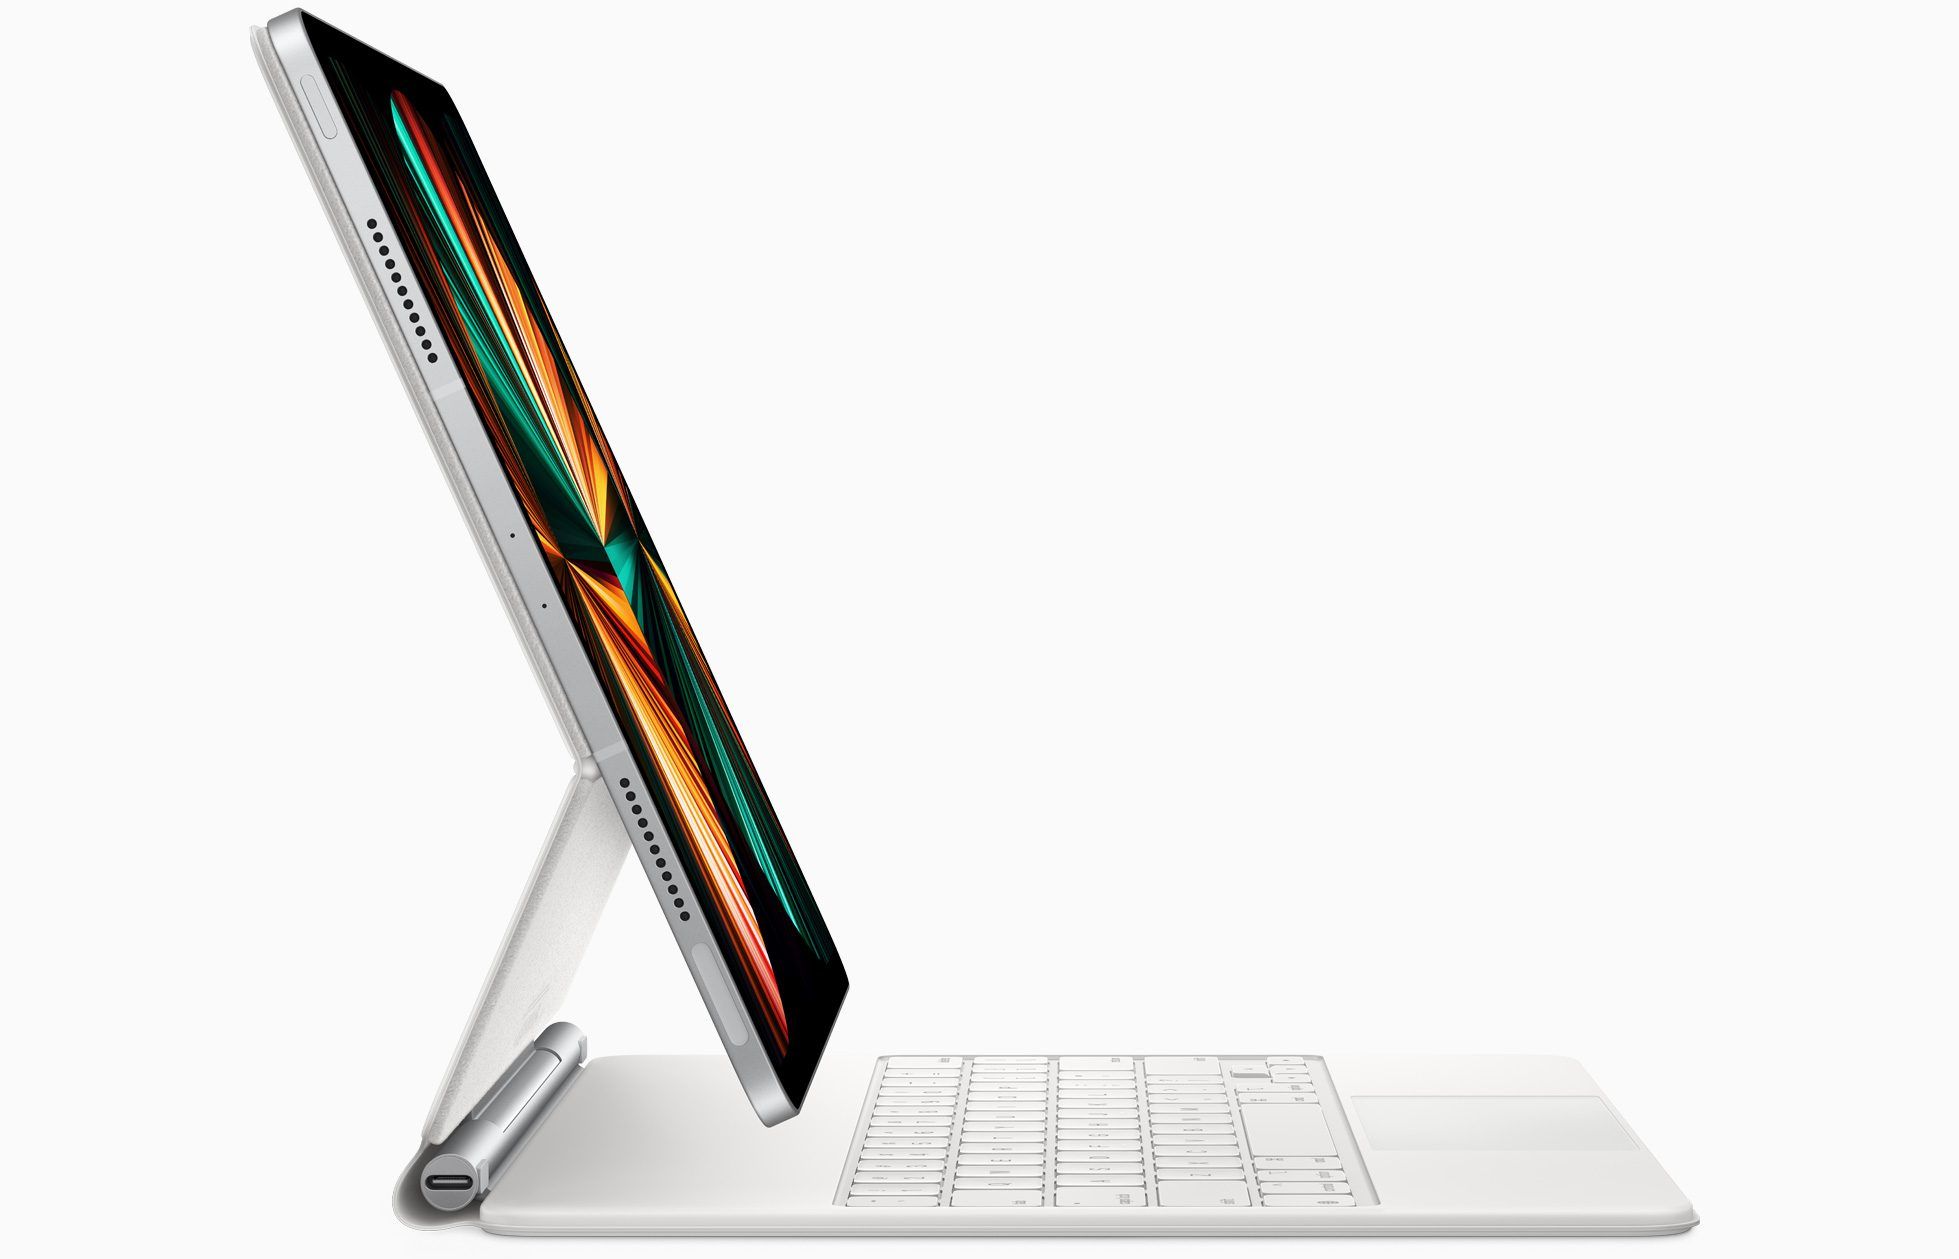 The 2021 iPad Pro is shown, the only device with Center Stage currently